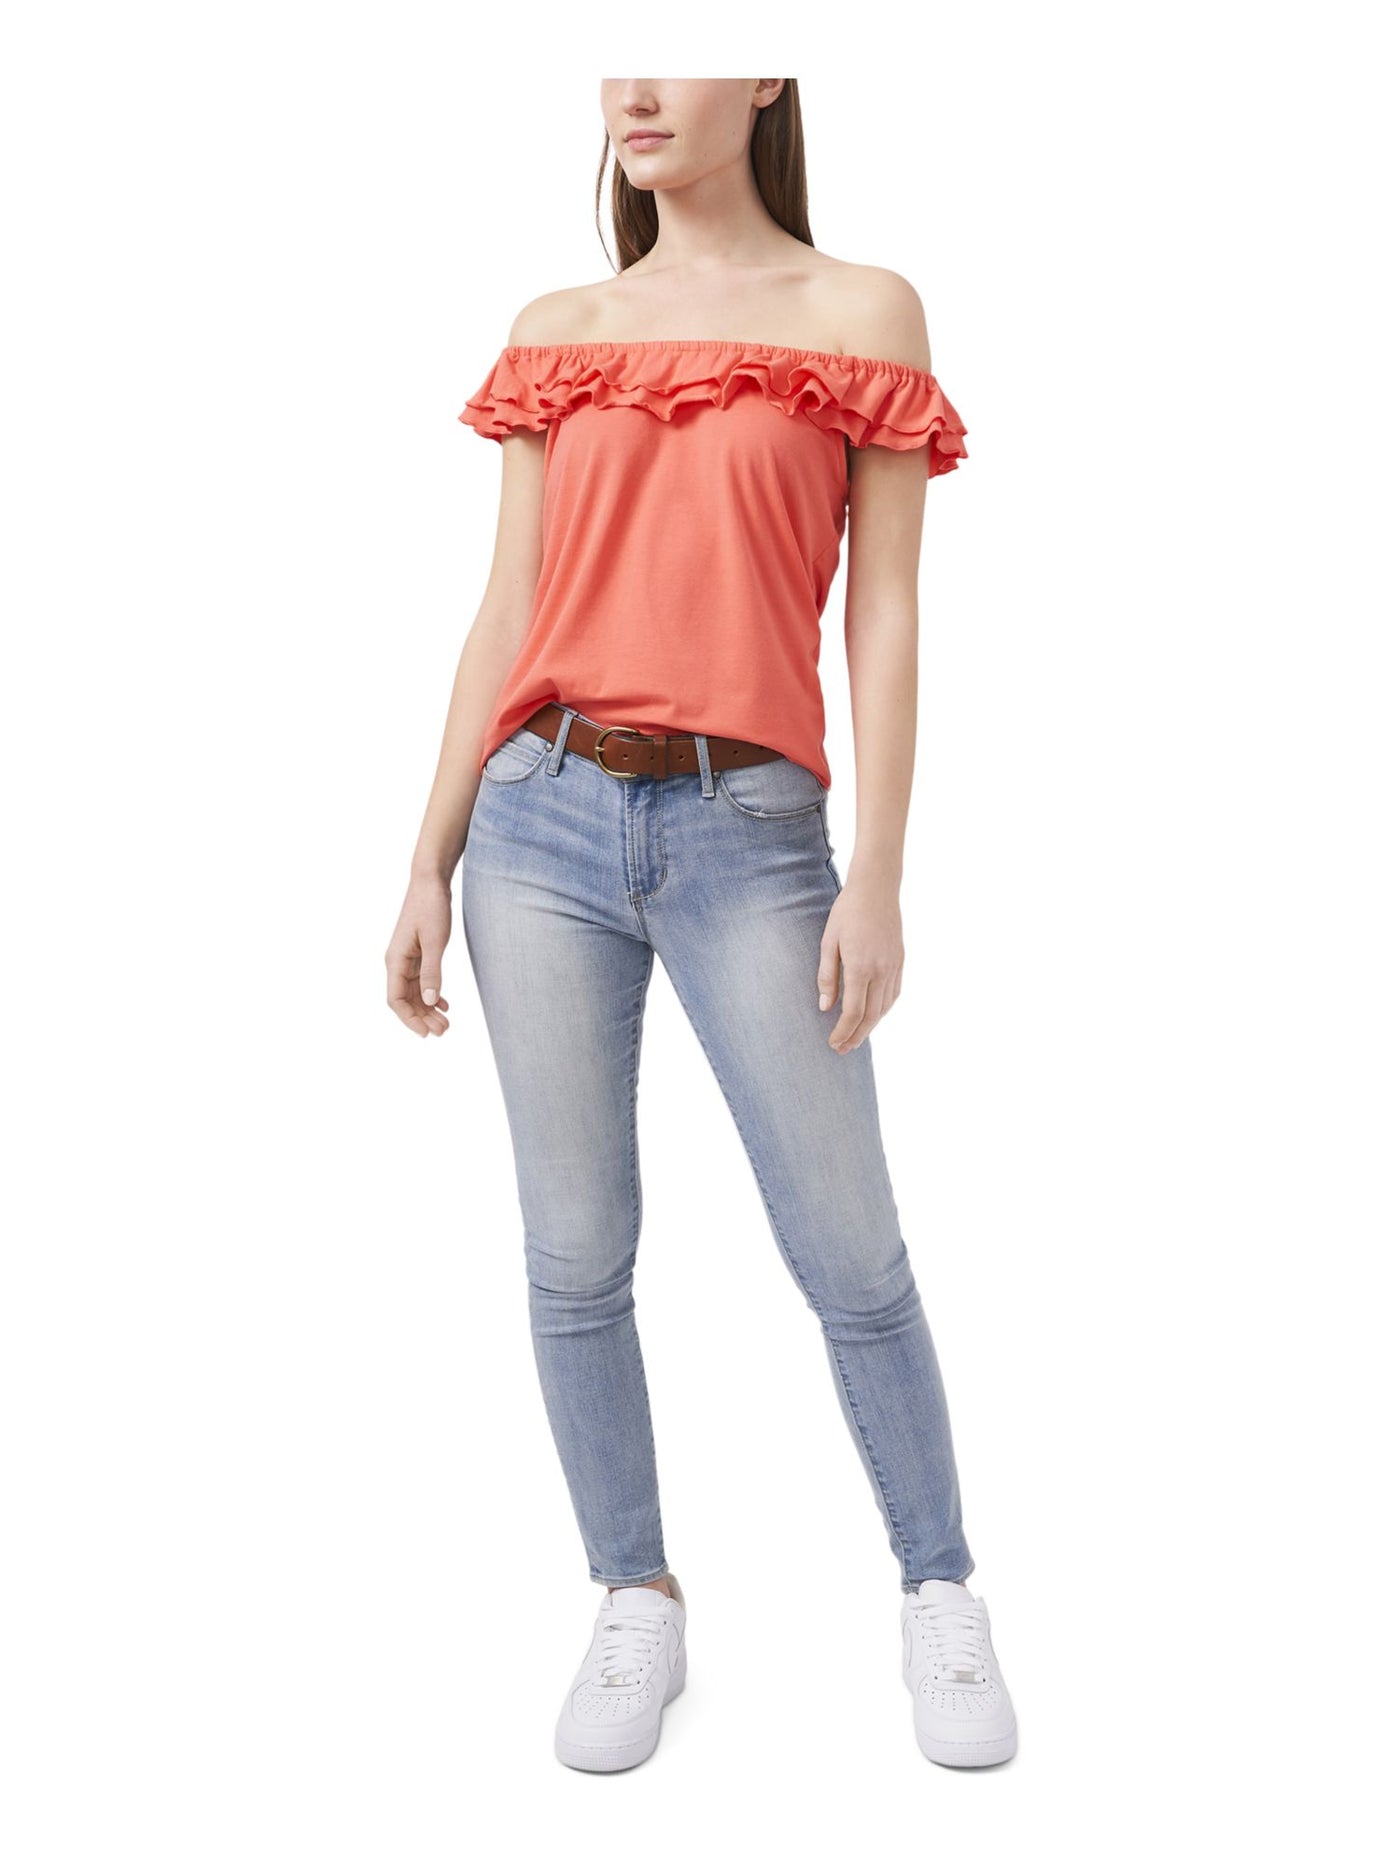 RILEY&RAE Womens Coral Stretch Ruffled Flutter Sleeve Off Shoulder Top XL